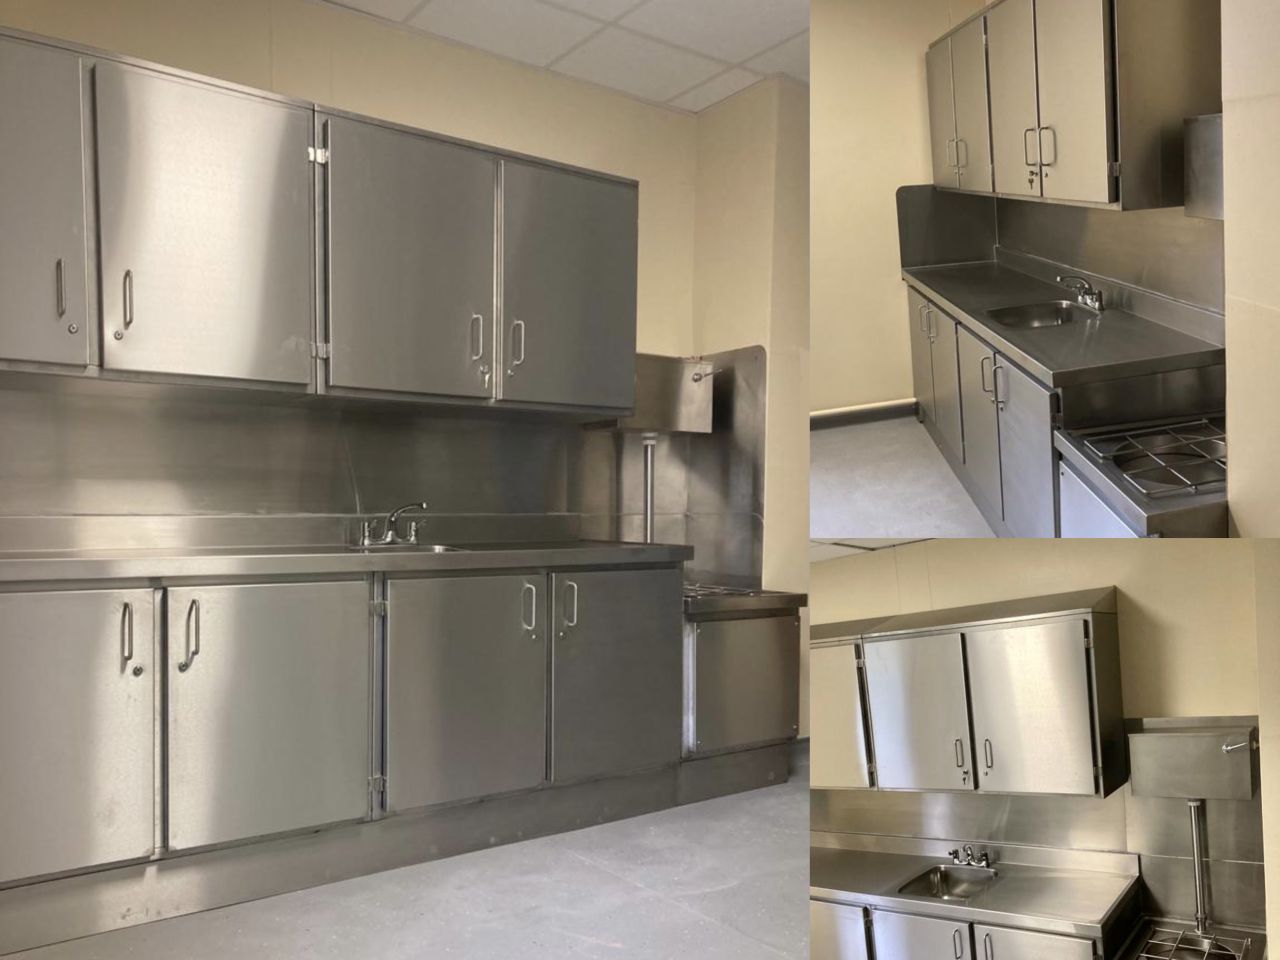 Dec 2020: 5 Phases of Rapid fit-outs have commenced at University Hospital Waterford